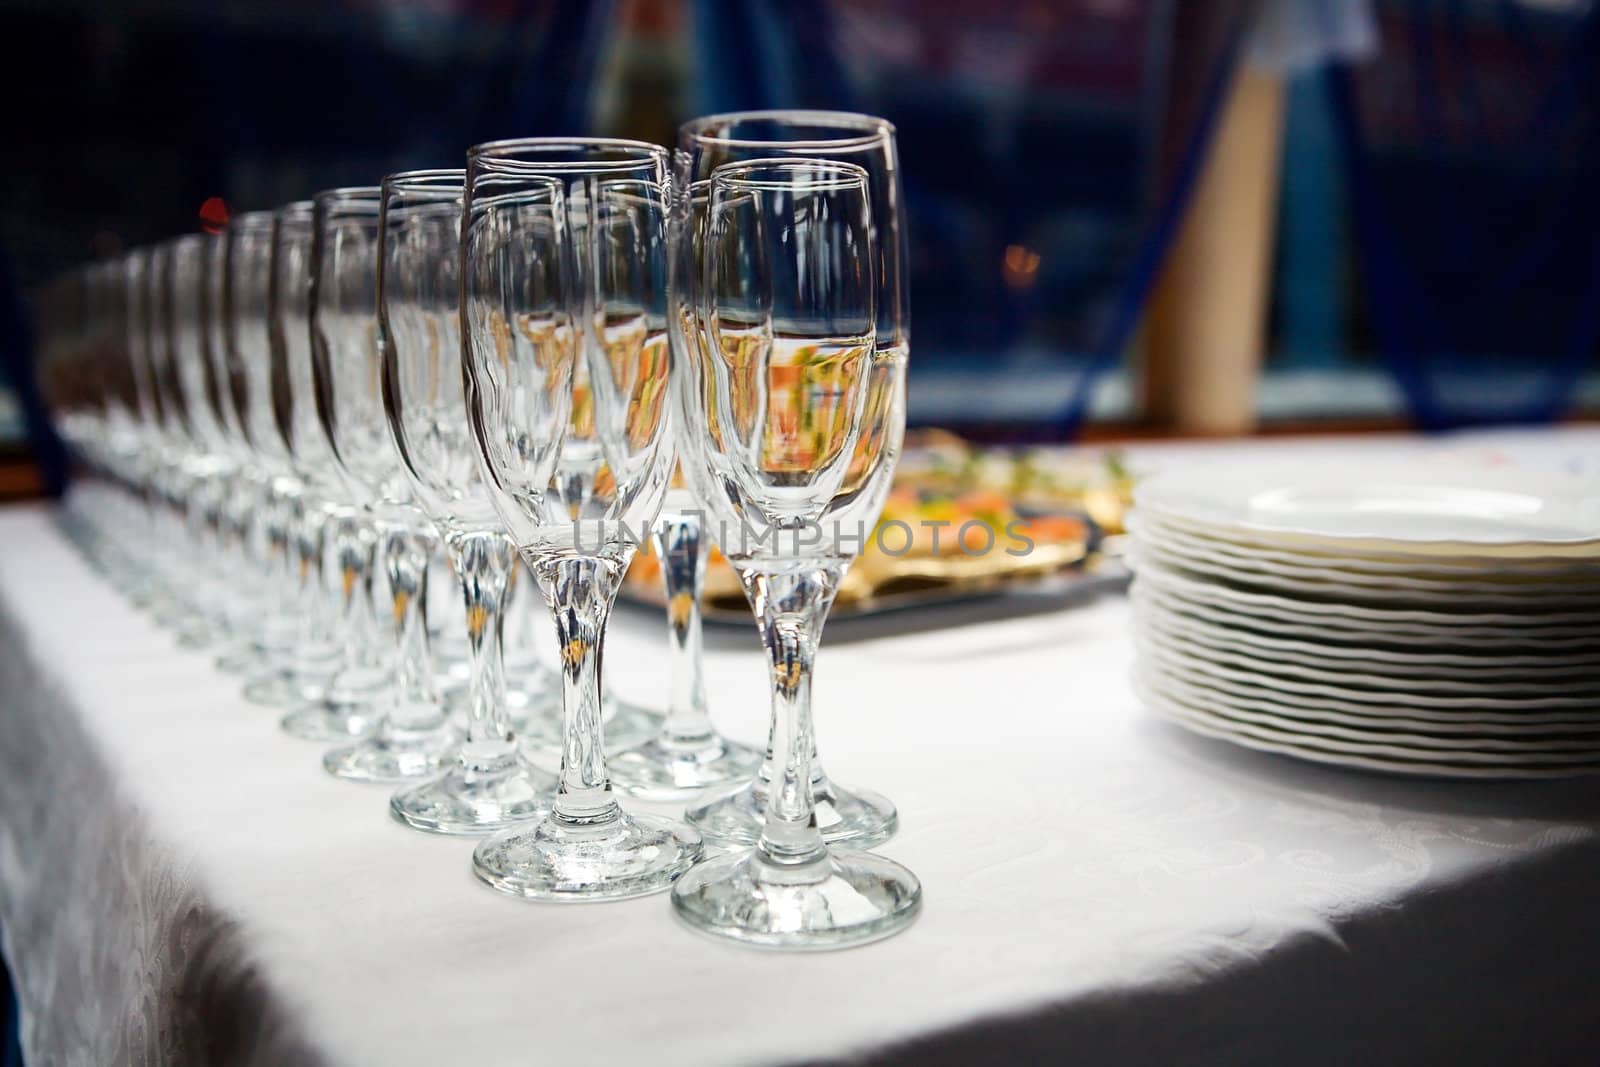 Empty Glasses and plates on restaurant table before party begins